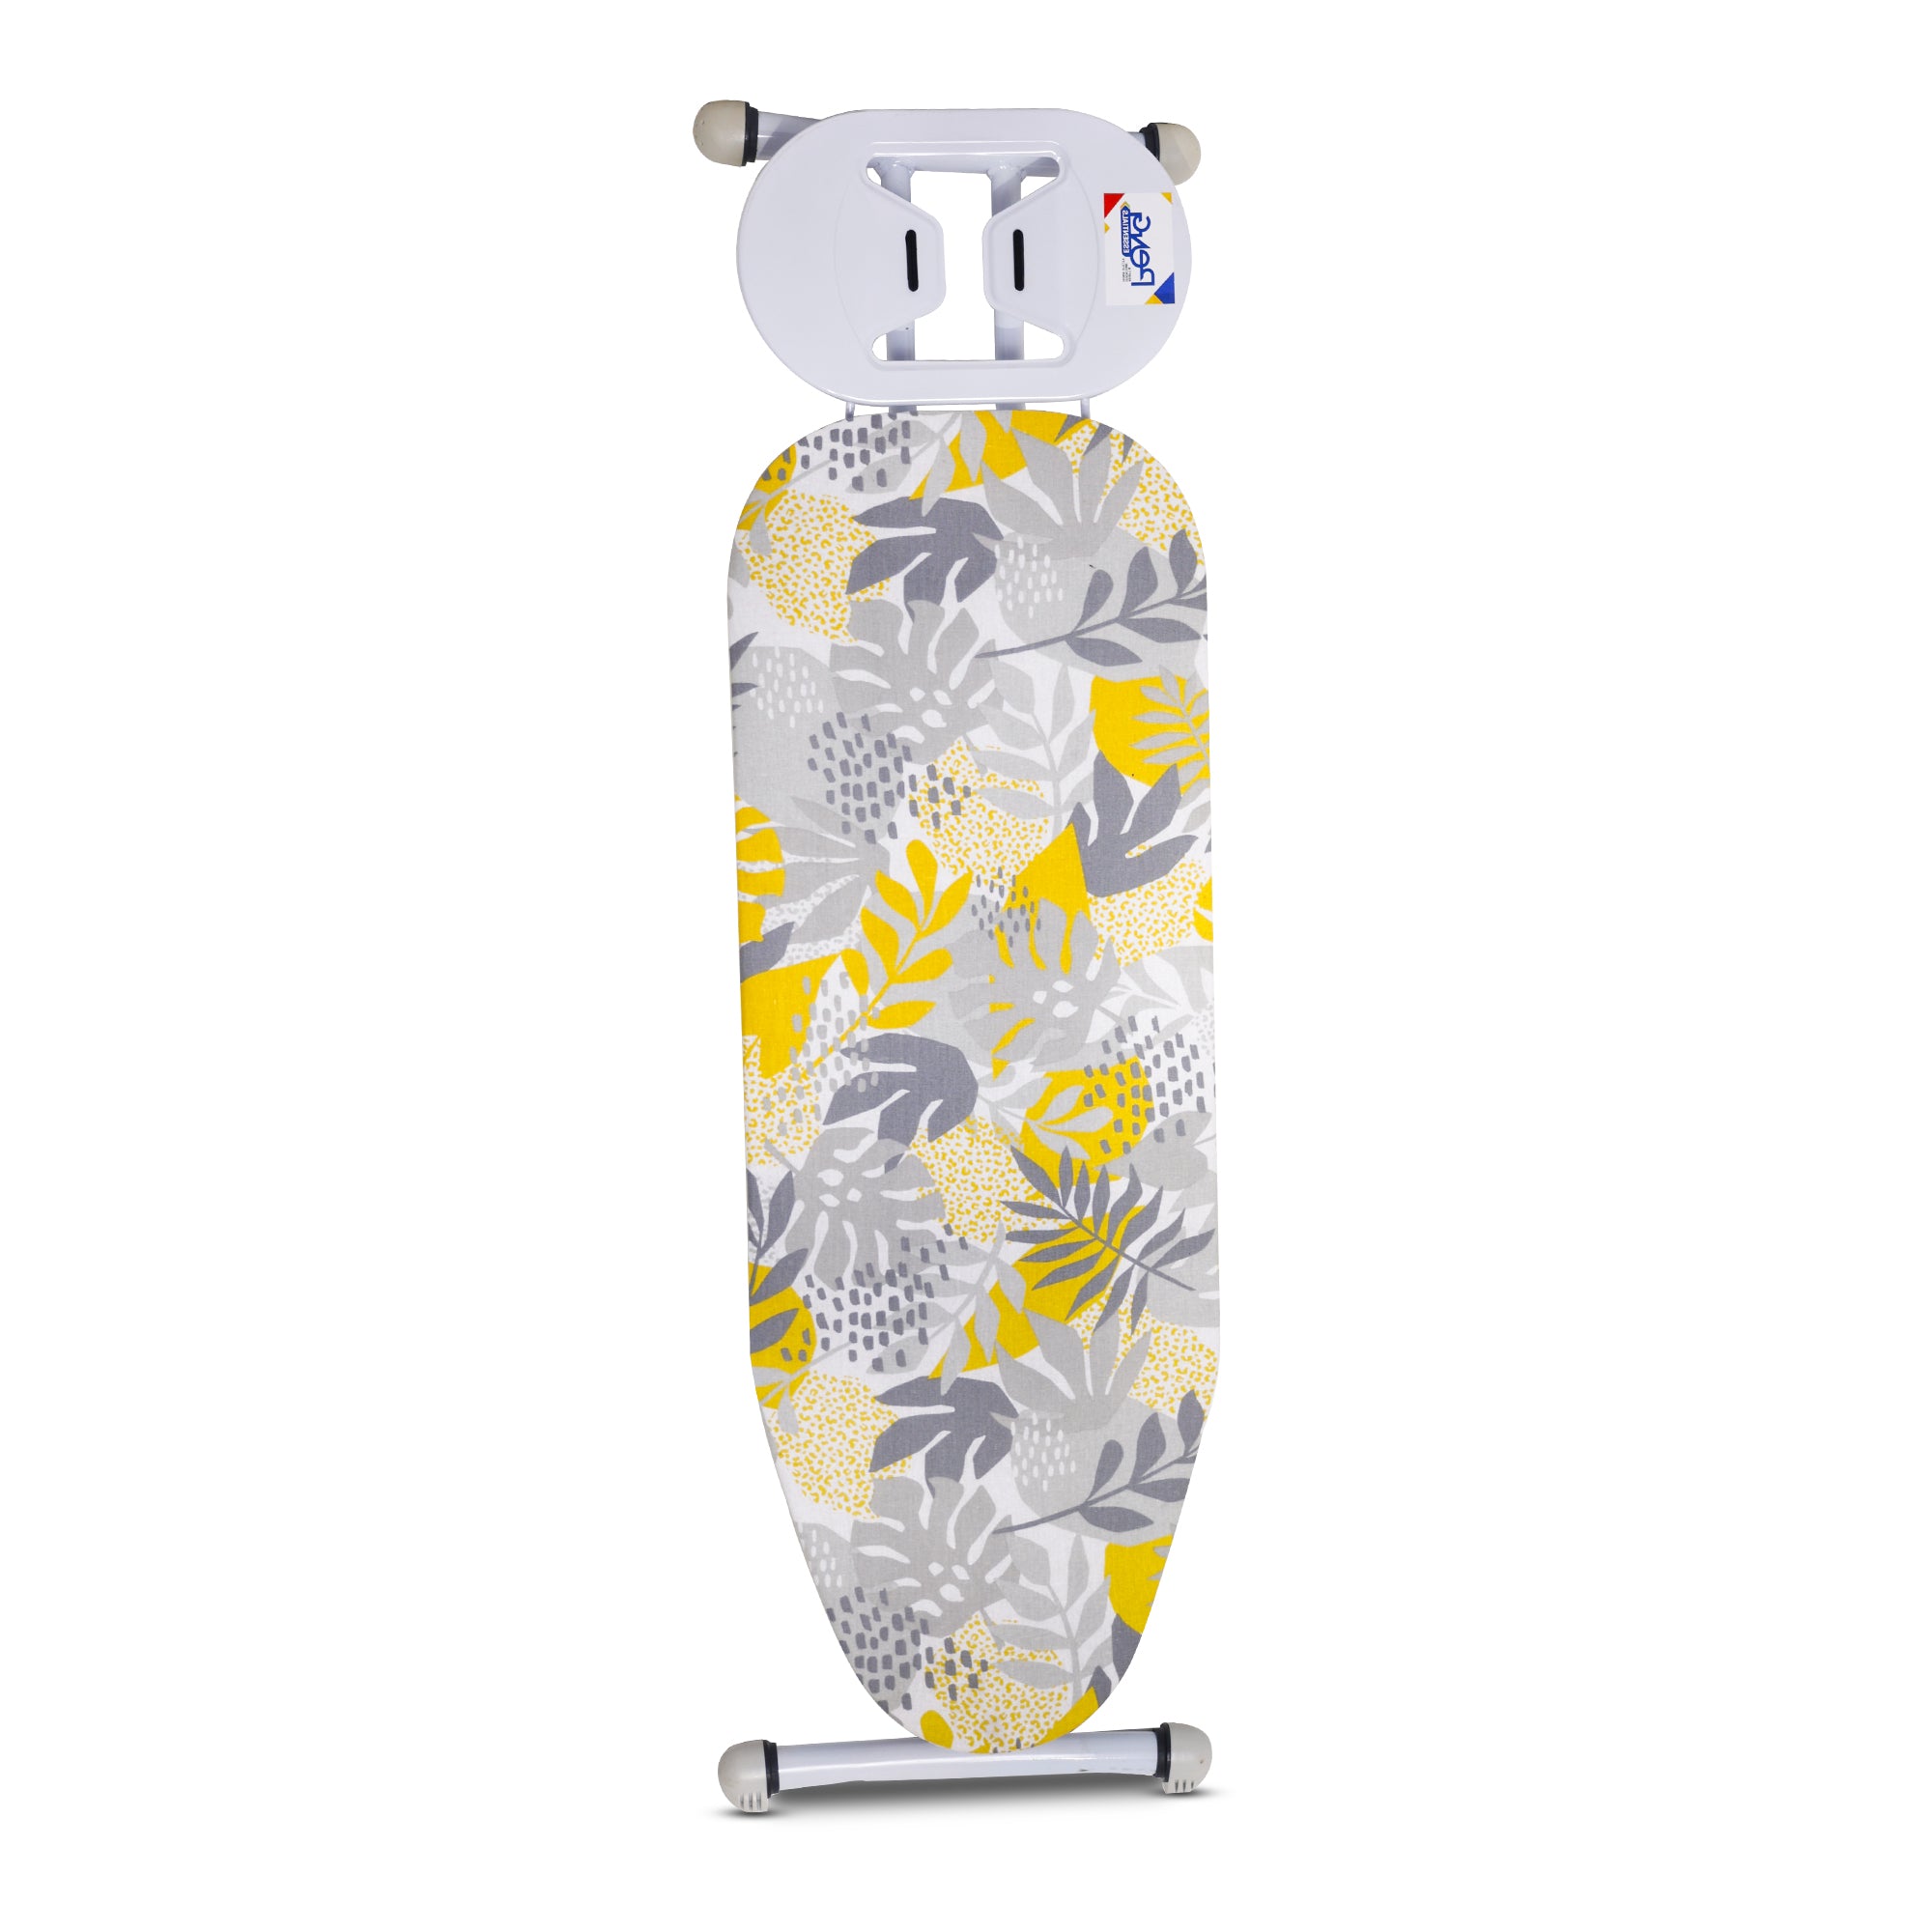 Salzburg Ironing Board | 3-Leg Small Elliptical Ironing Board with Silicone Iron Rest I Floral